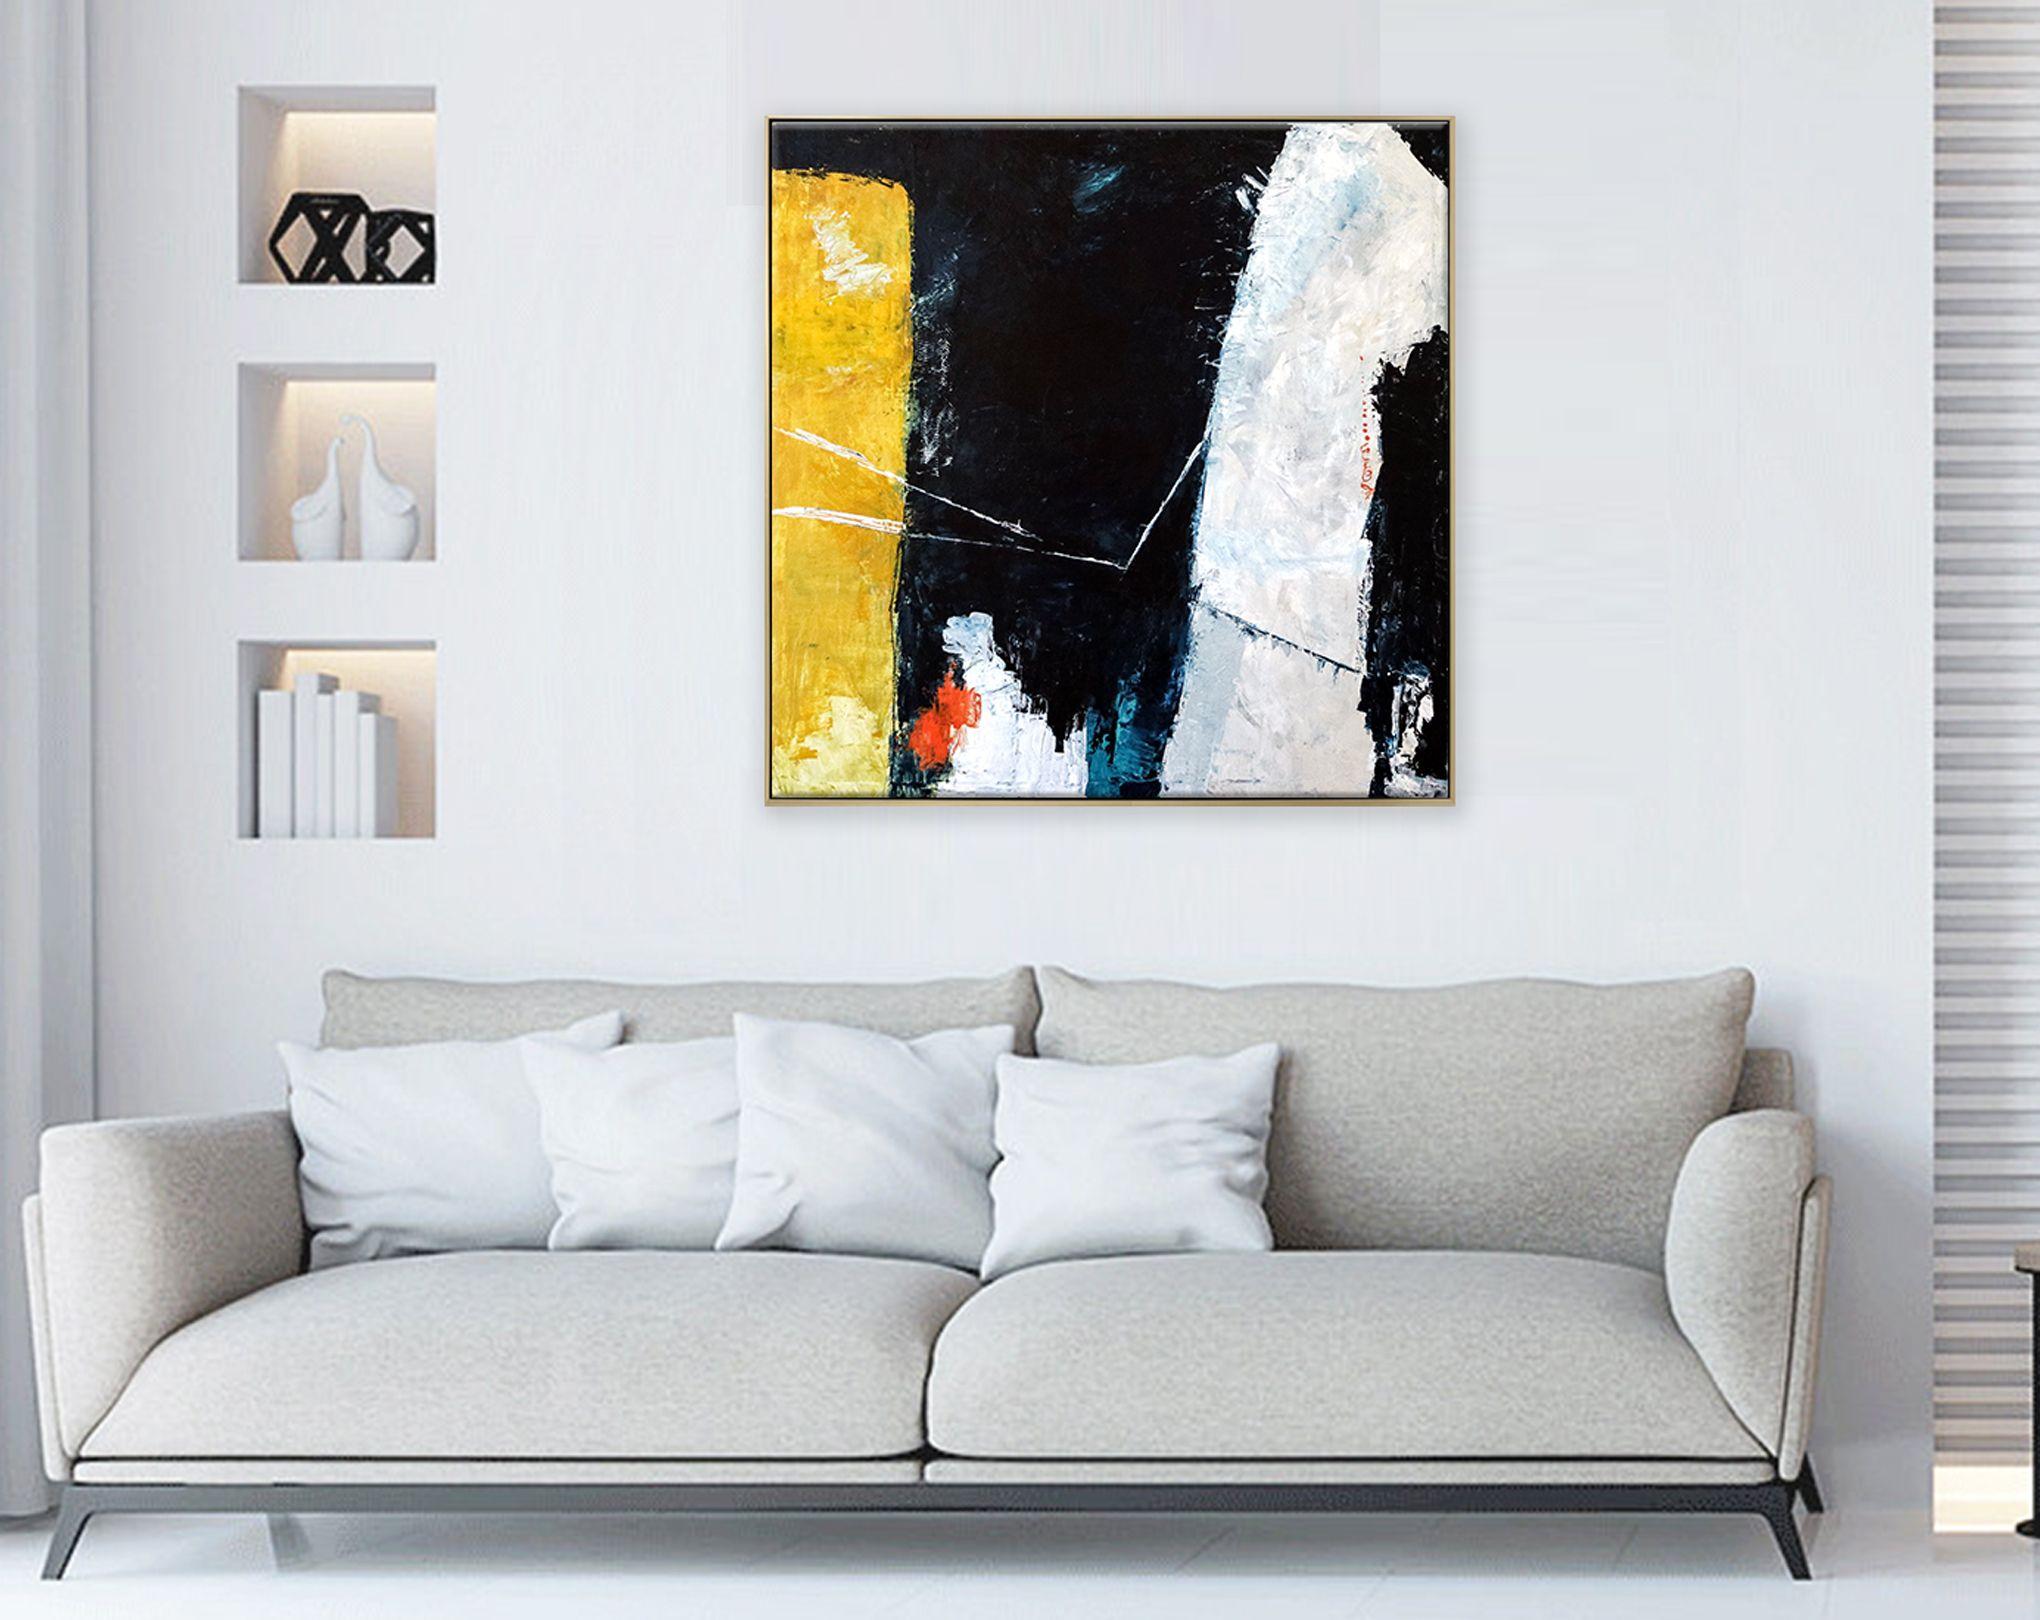 A contemporary, modern, abstract expressionism, acrylic painting on canvas, colors of dark blue, yellow and white. â€¢ PICTURE HANGER ATTACHED: Yes â€¢ SIDES PAINTED: Yes â€¢ READY TO HANG: Yes â€¢ ARTIST SIGNED: Yes â€¢ CERTIFICATE OF AUTHENTICITY: